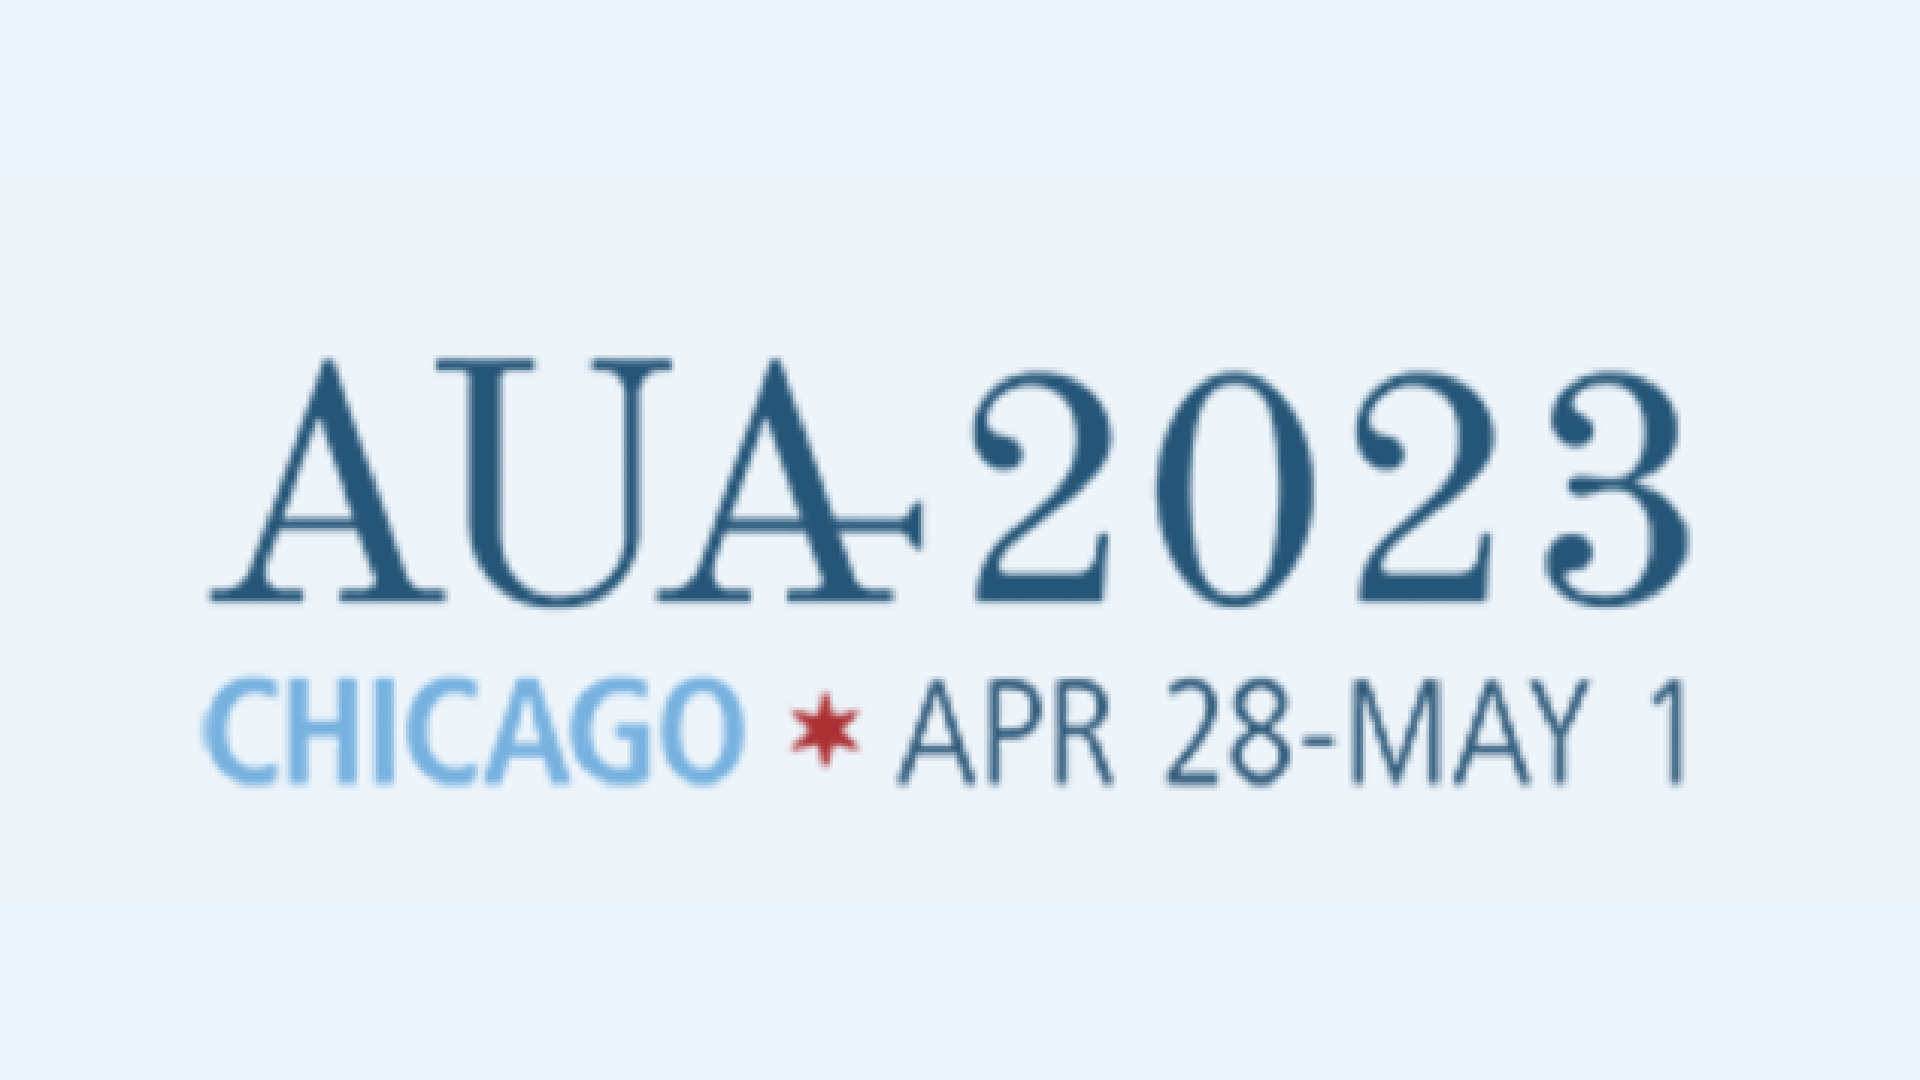 The Best Exhibition Stand Builders for Trade Shows in AUA 2023 Chicago, USA